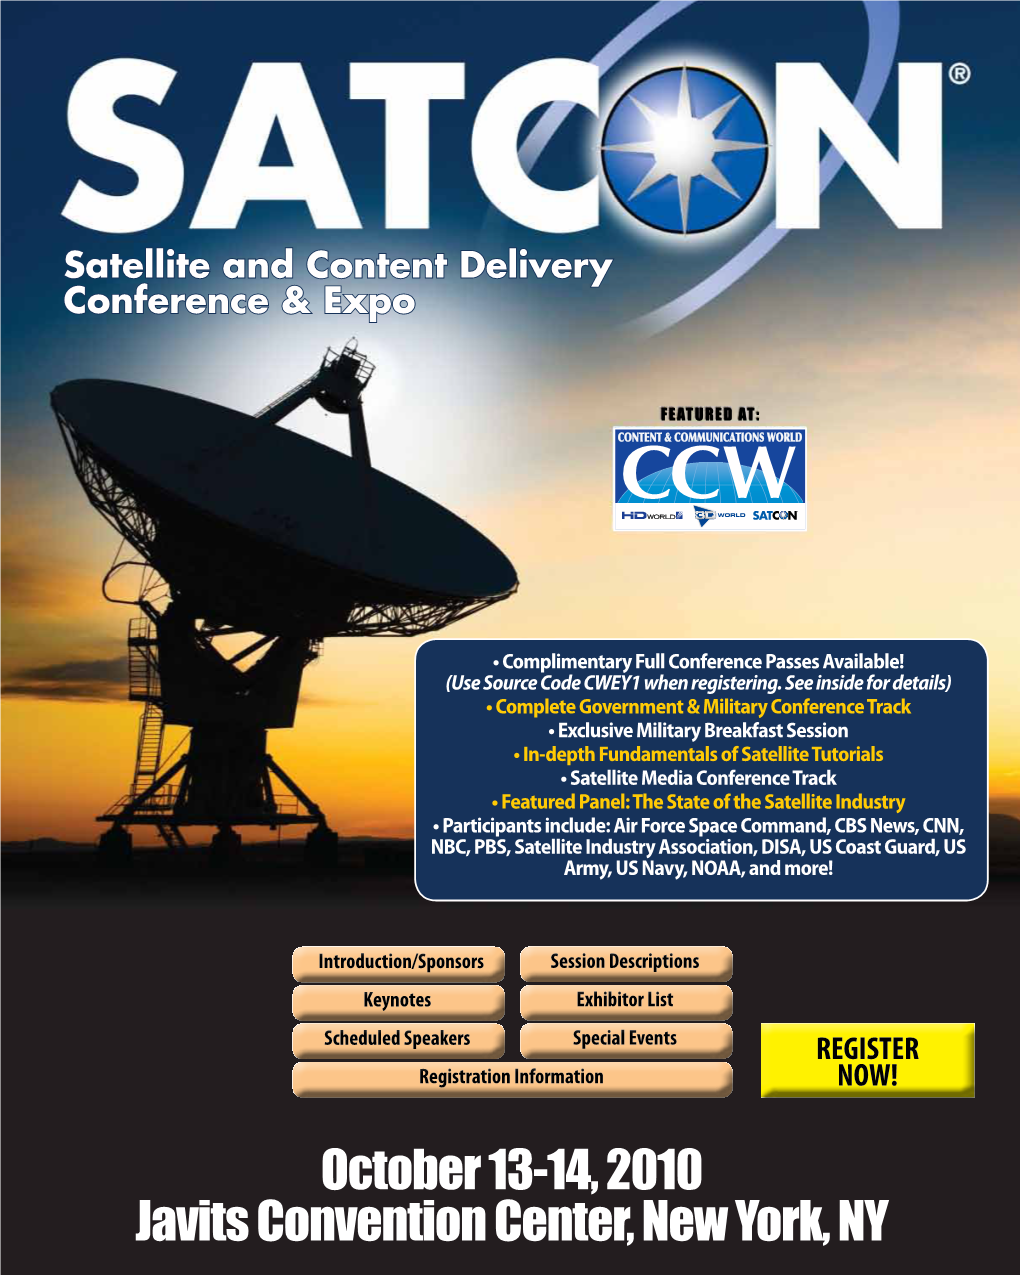 October 13-14, 2010 Javits Convention Center, New York, NY SATCON Is the Premier Conference and Exhibition This Fall for Satellite Communications and Content Delivery